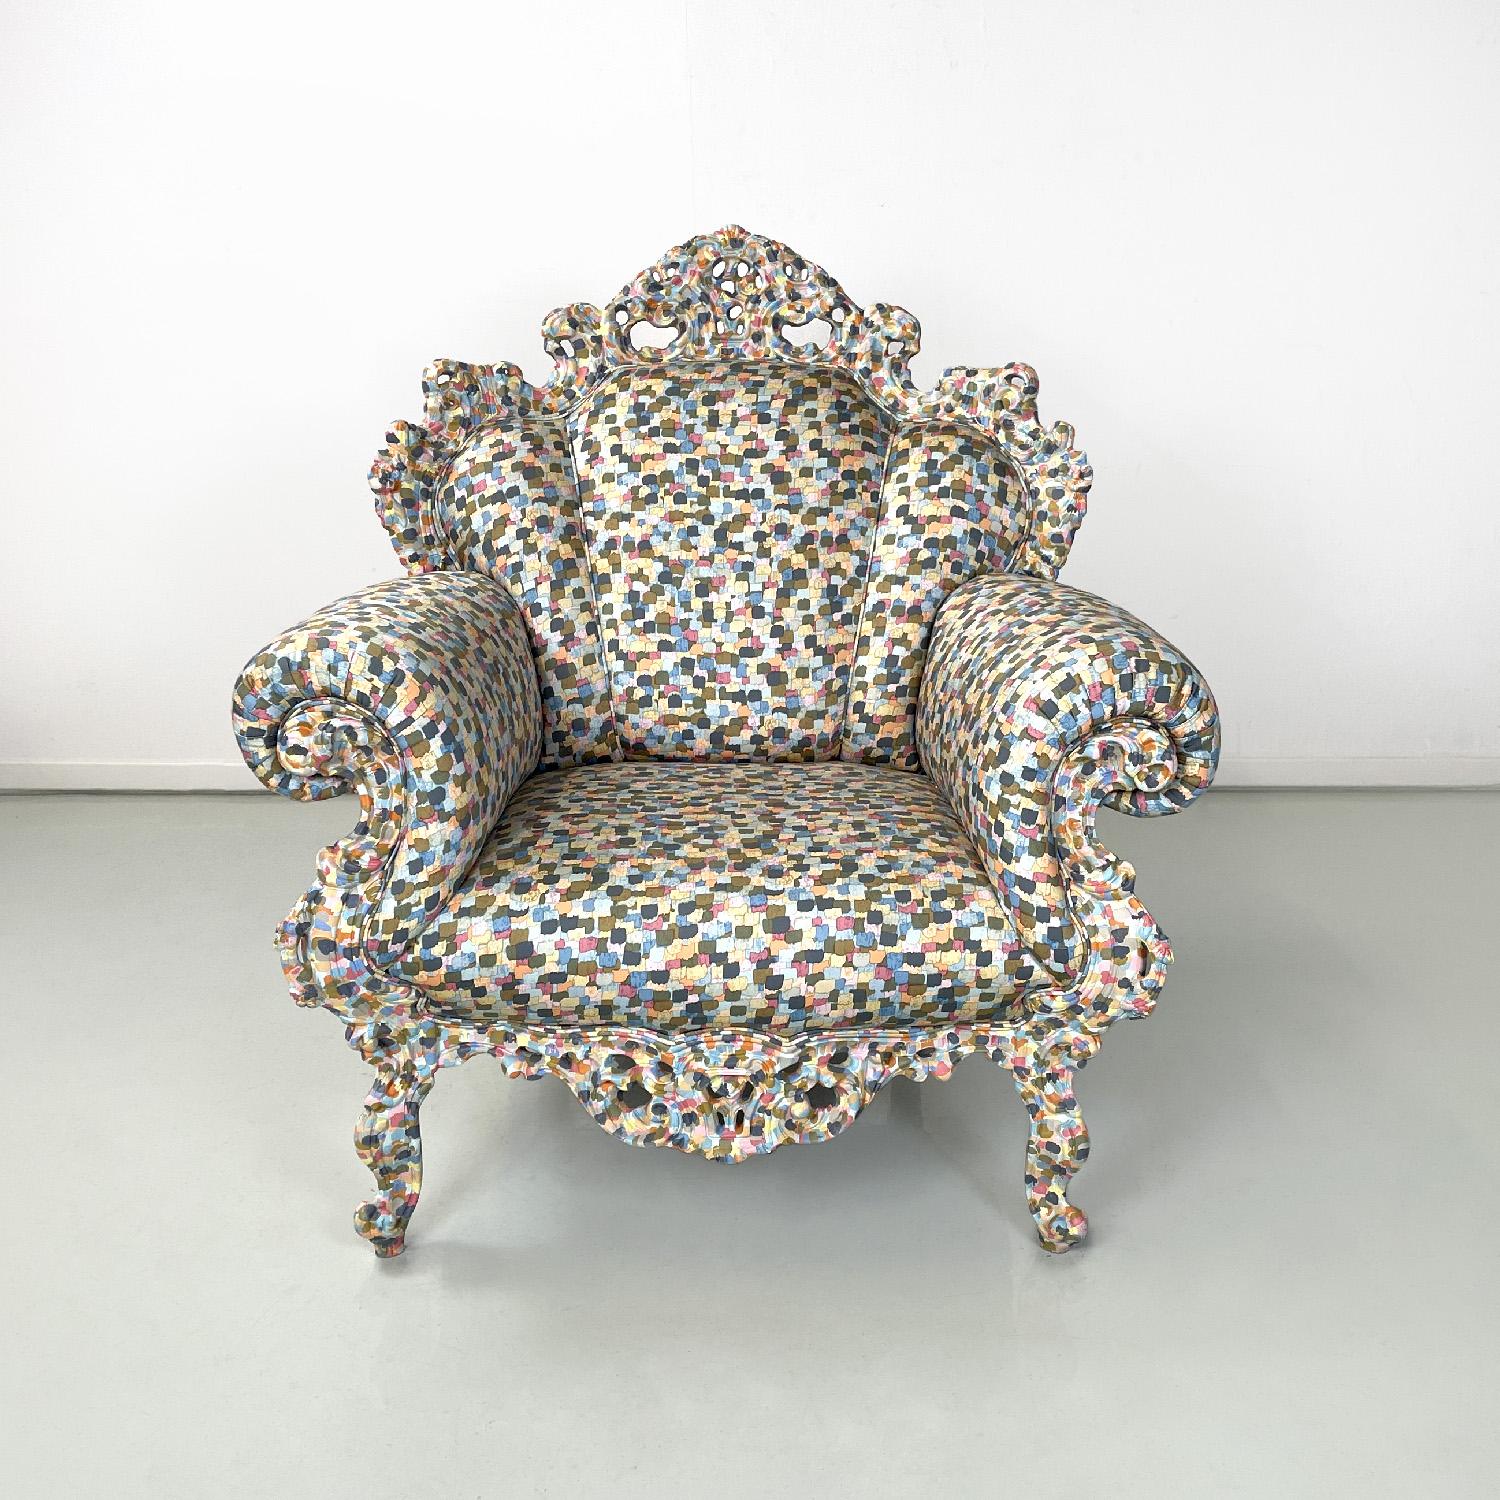 Italian modern armchair Proust by Alessandro Mendini for Cappellini, 1990s
Armchair mod. Proust with fabric and hand-painted wood. The pattern of the fabric and the decoration on the wood is composed of many square brushstrokes that overlap and sit